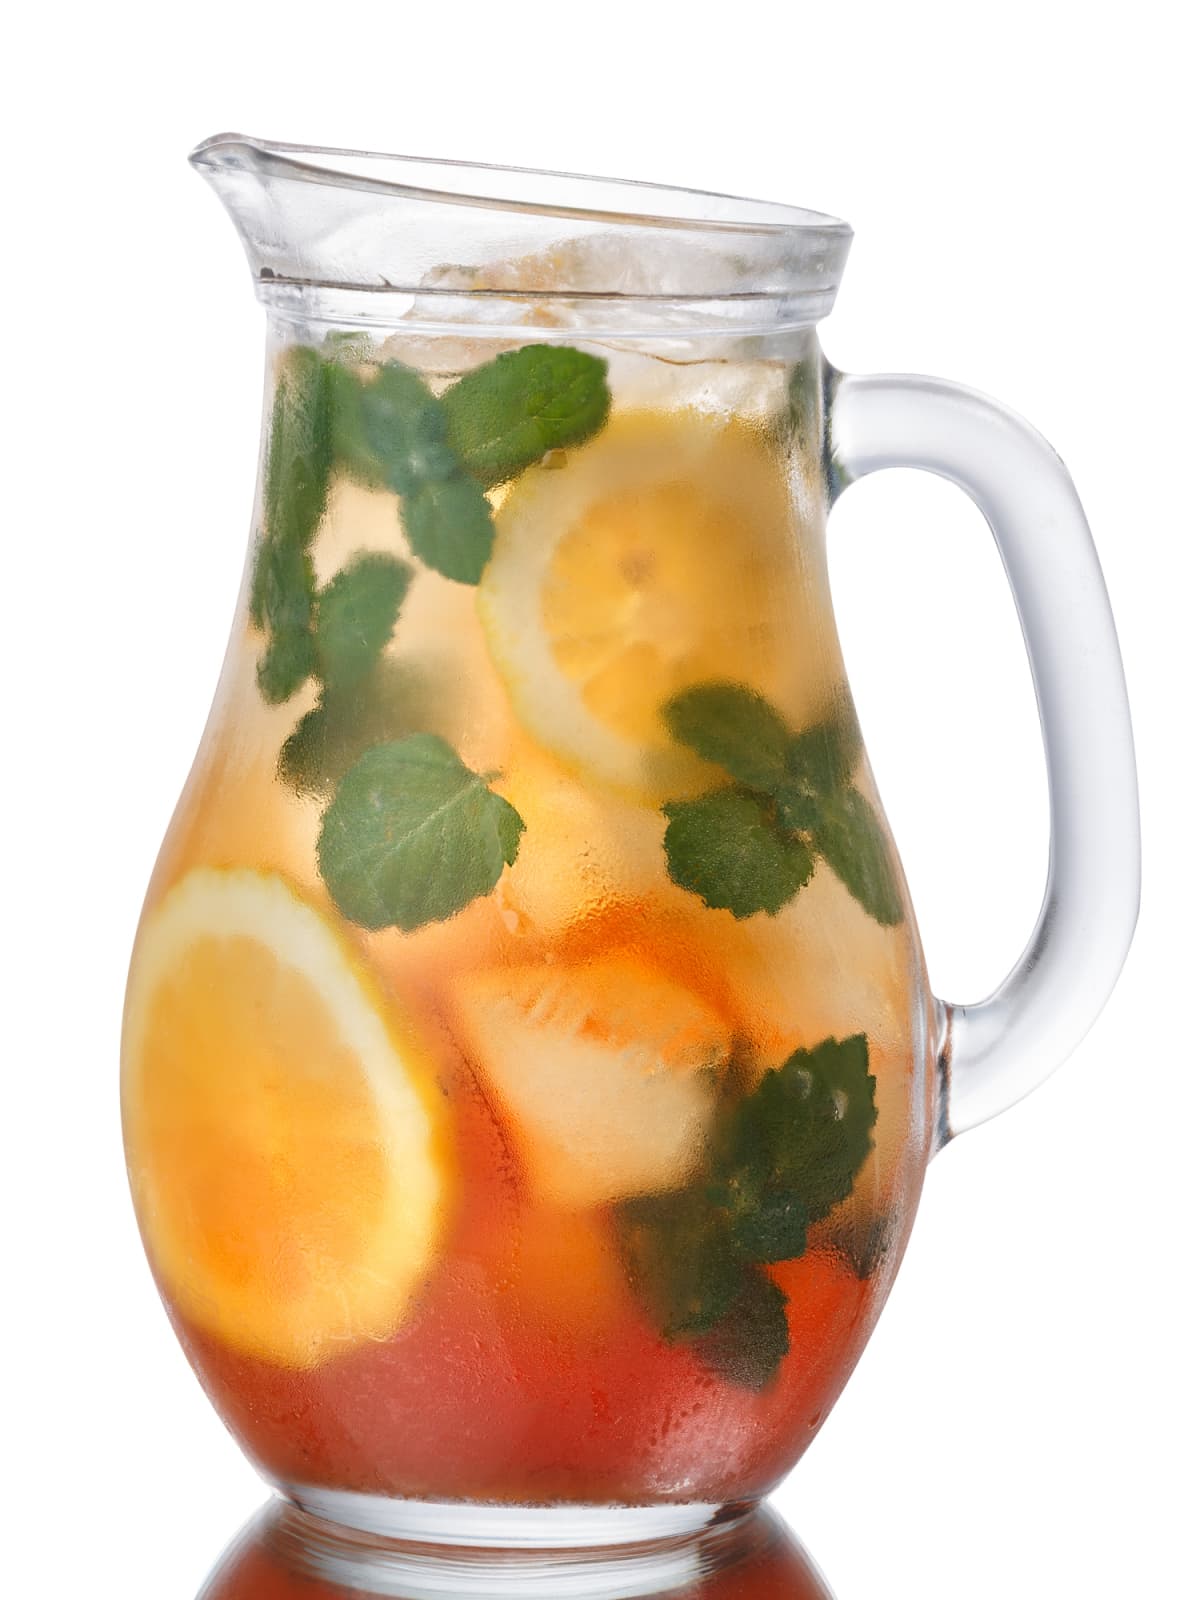 Pitcher of iced tea with mint and lemon.